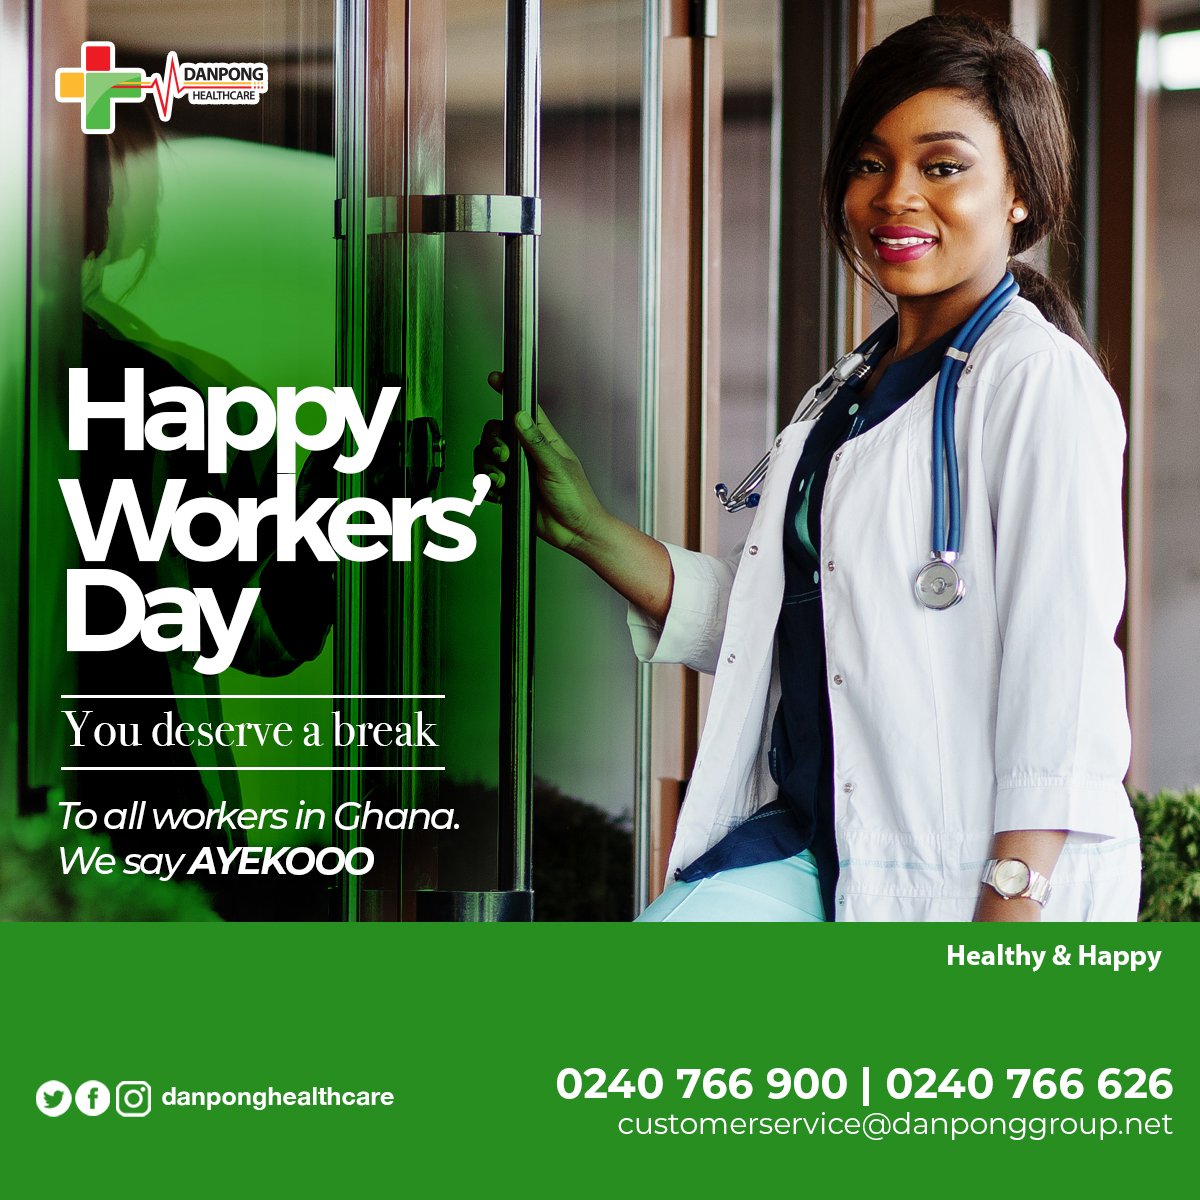 Happy Workers’ Day to all workers in Ghana.
We say AYEKOO.

#Danpongcares
#Healthyandhappy